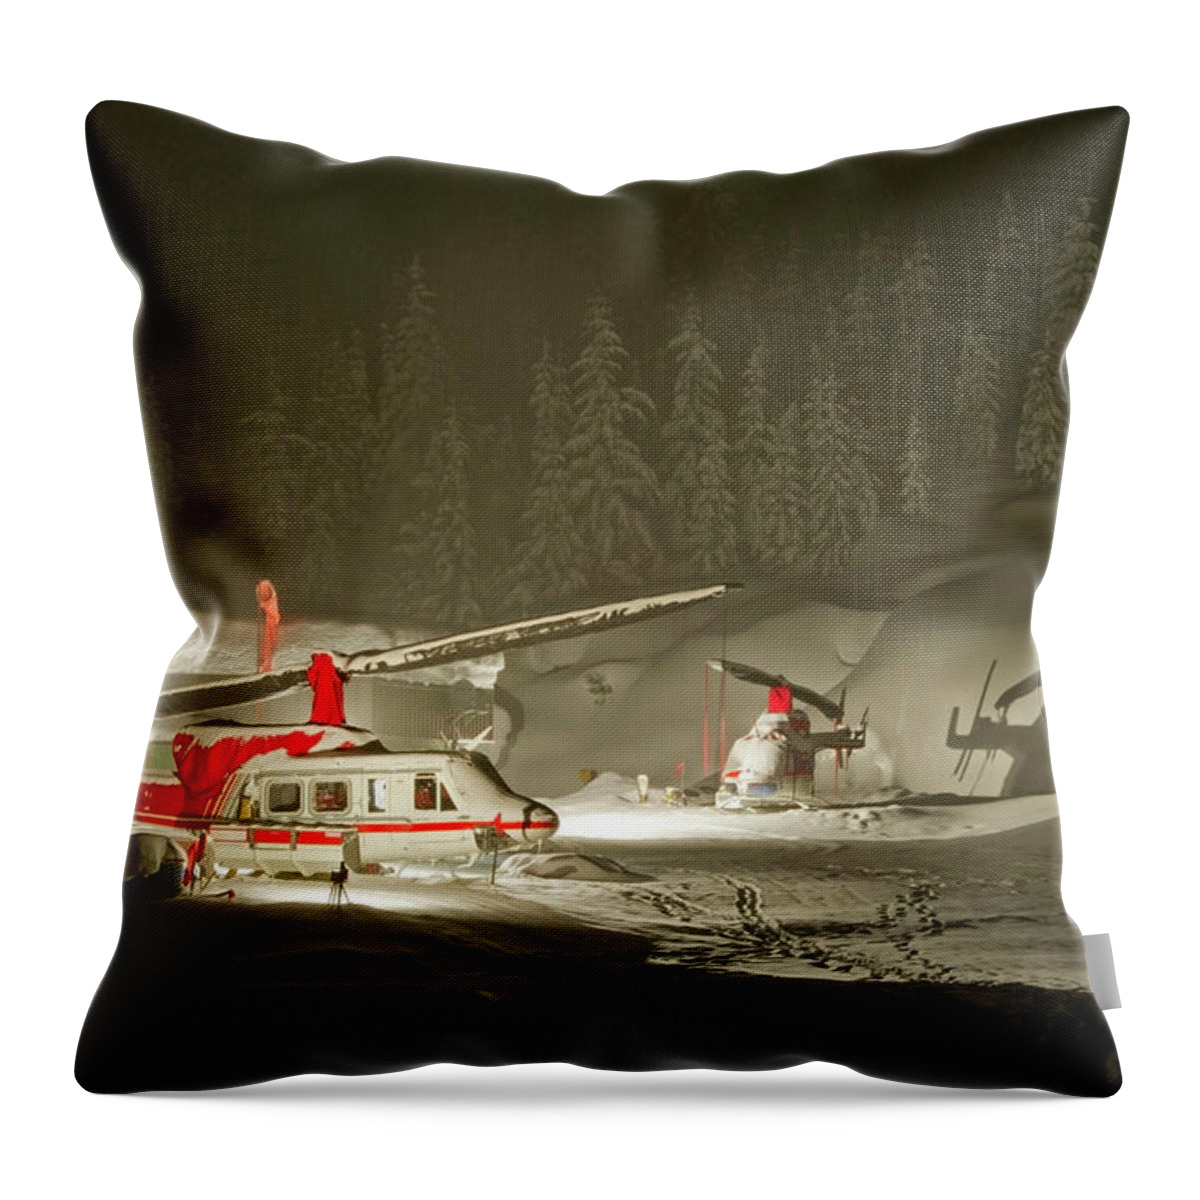 Snow Throw Pillow featuring the photograph Helicopters Used For Heli-skiing Parked by Topher Donahue